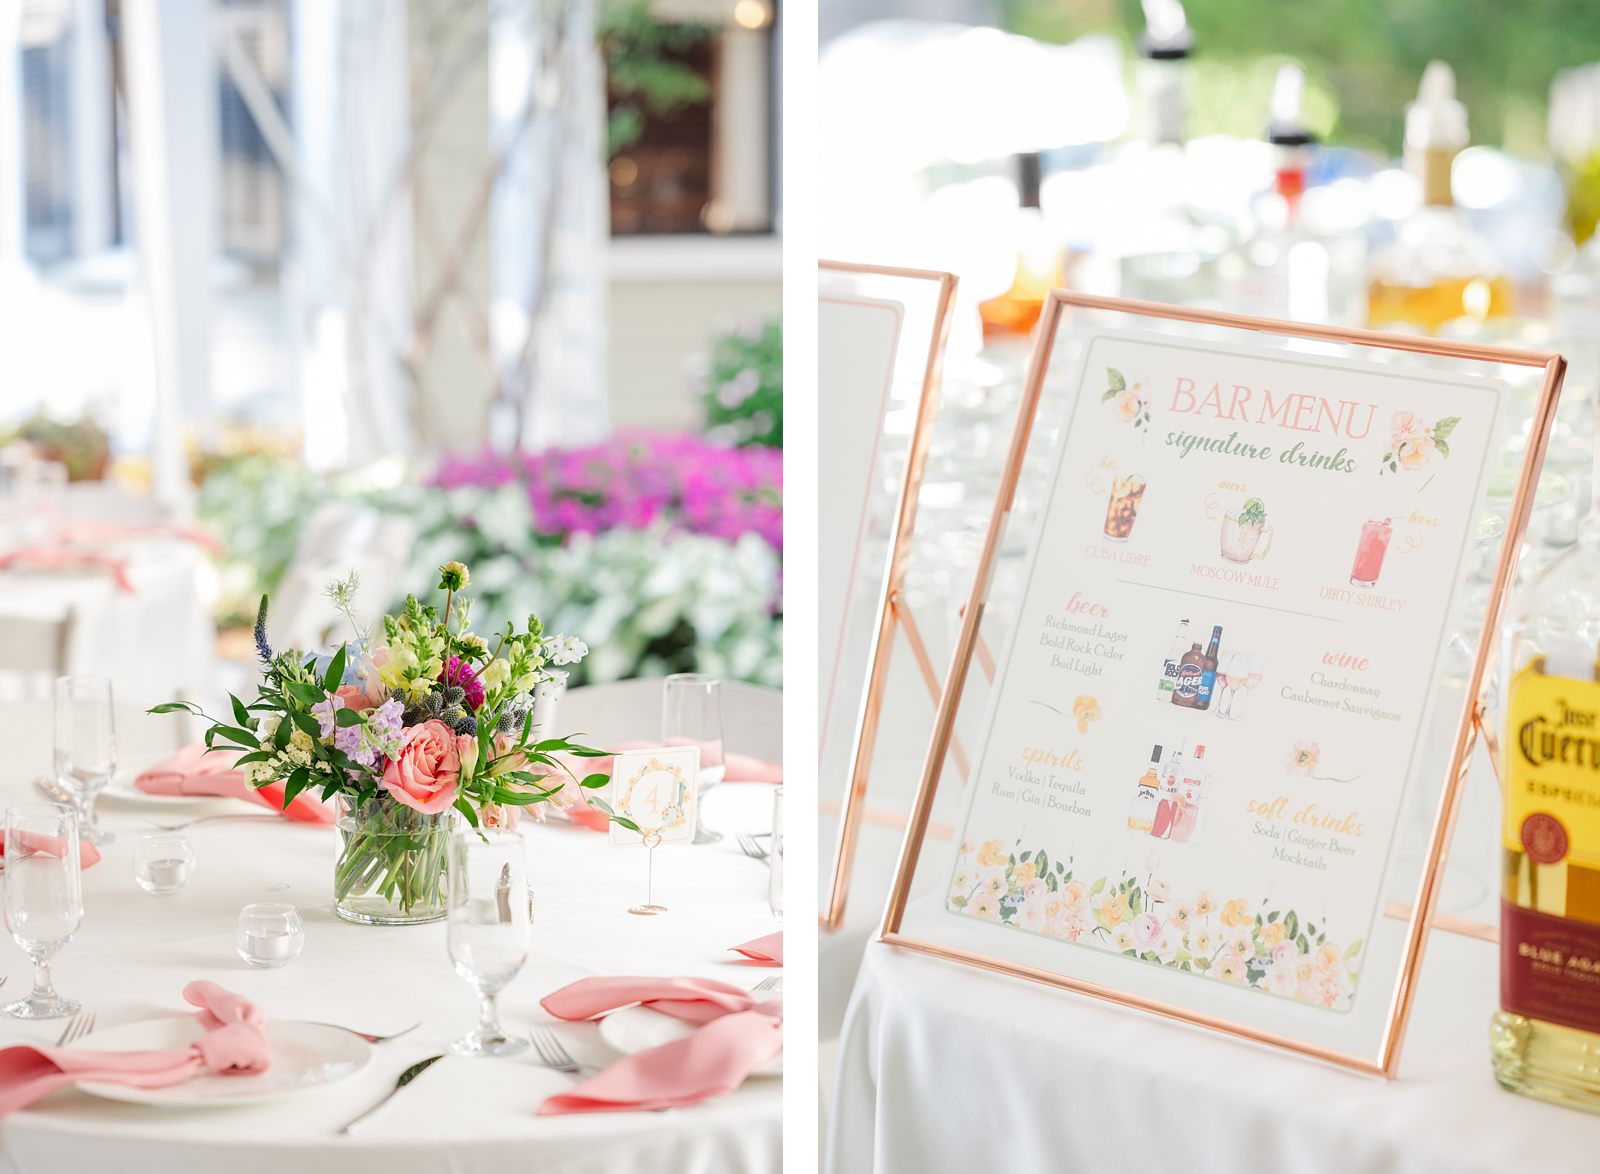 Colorful Reception Decor at Fall Lewis Ginter Wedding Reception